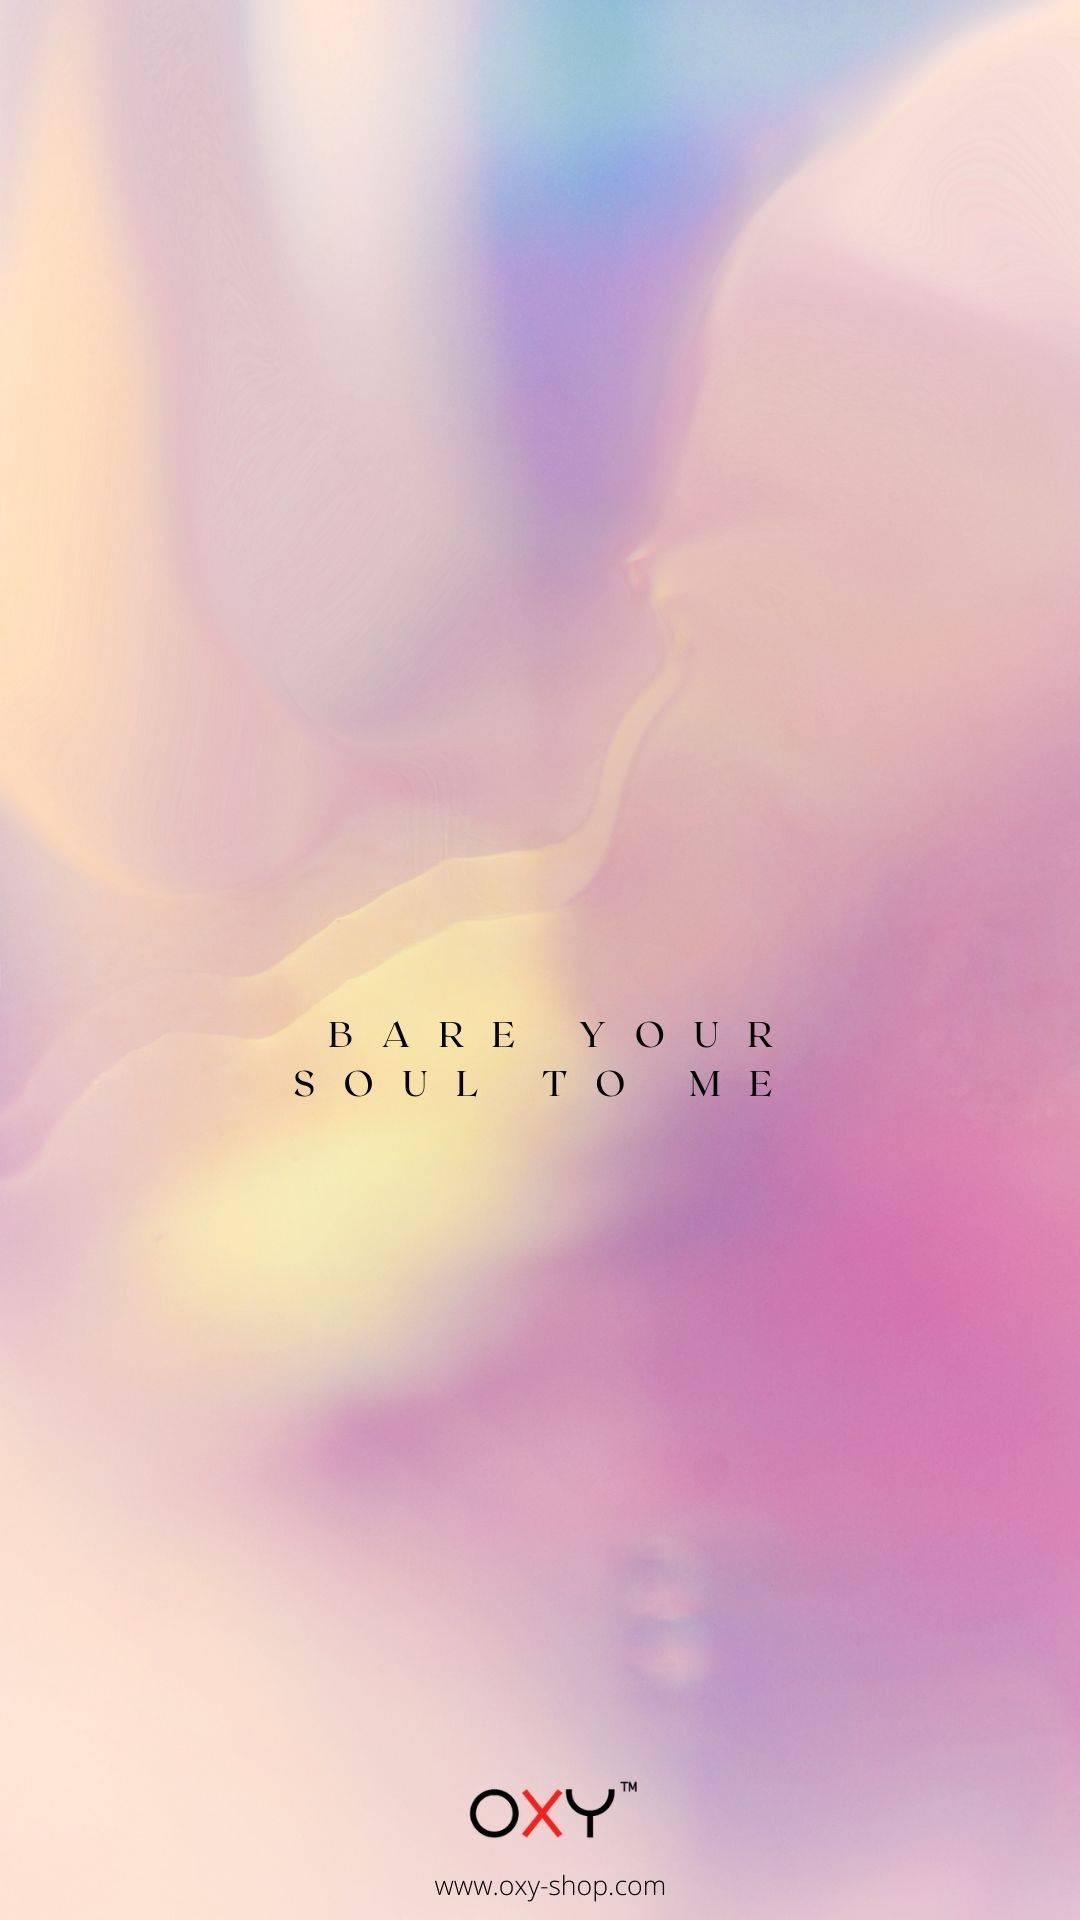 Bare your soul to me. - BDSM wallpaper